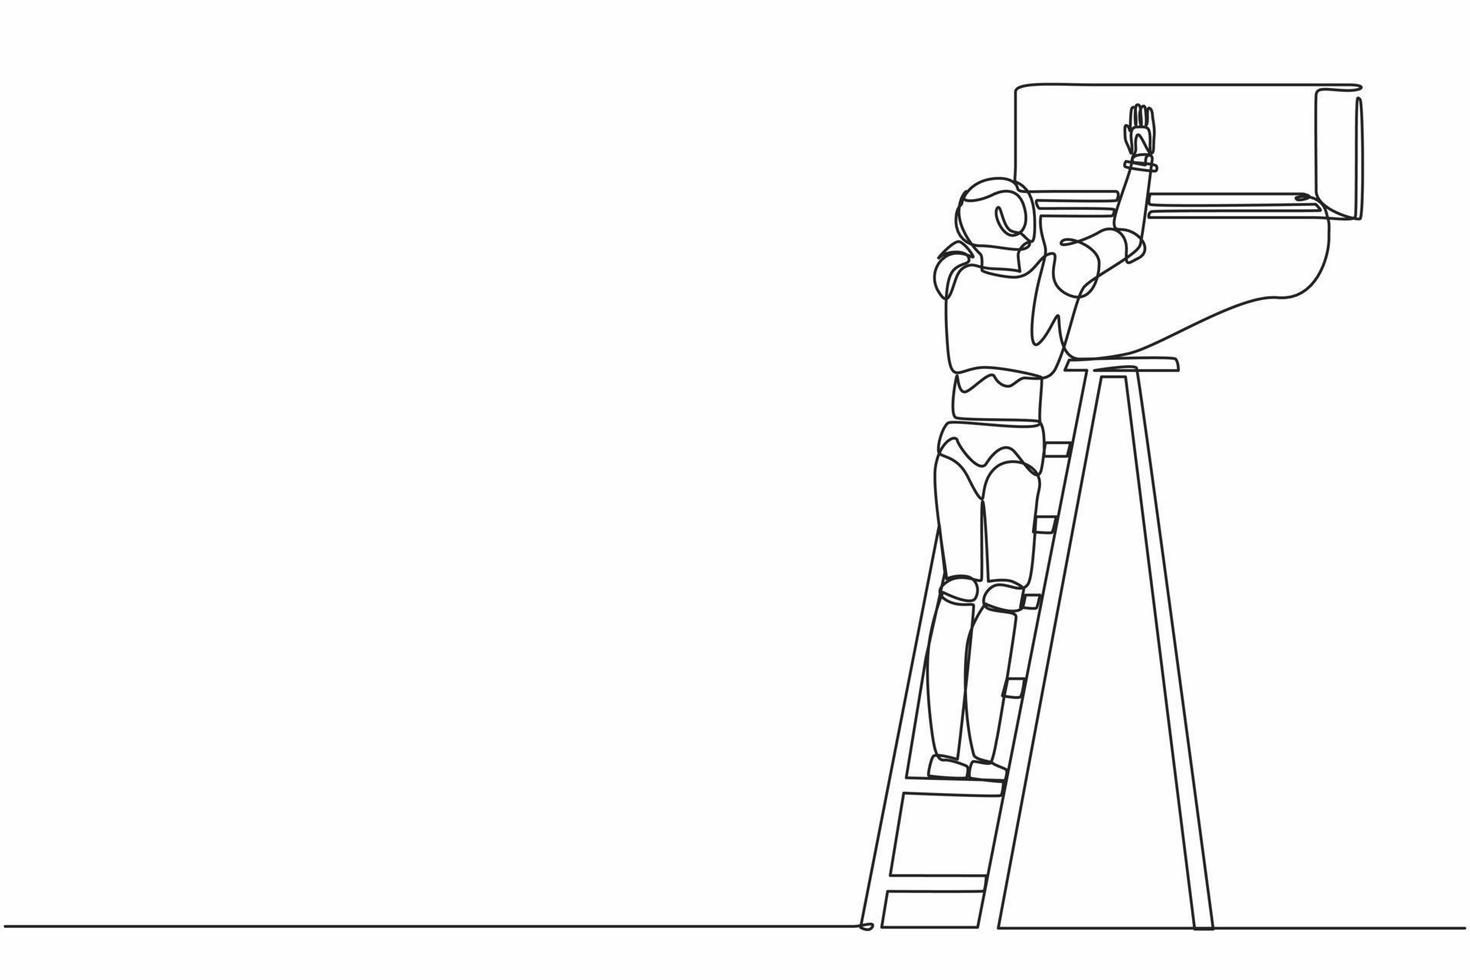 Single one line drawing robot repairman technician repairing air conditioner. Future technology. Artificial intelligence and machine learning. Continuous line draw design graphic vector illustration